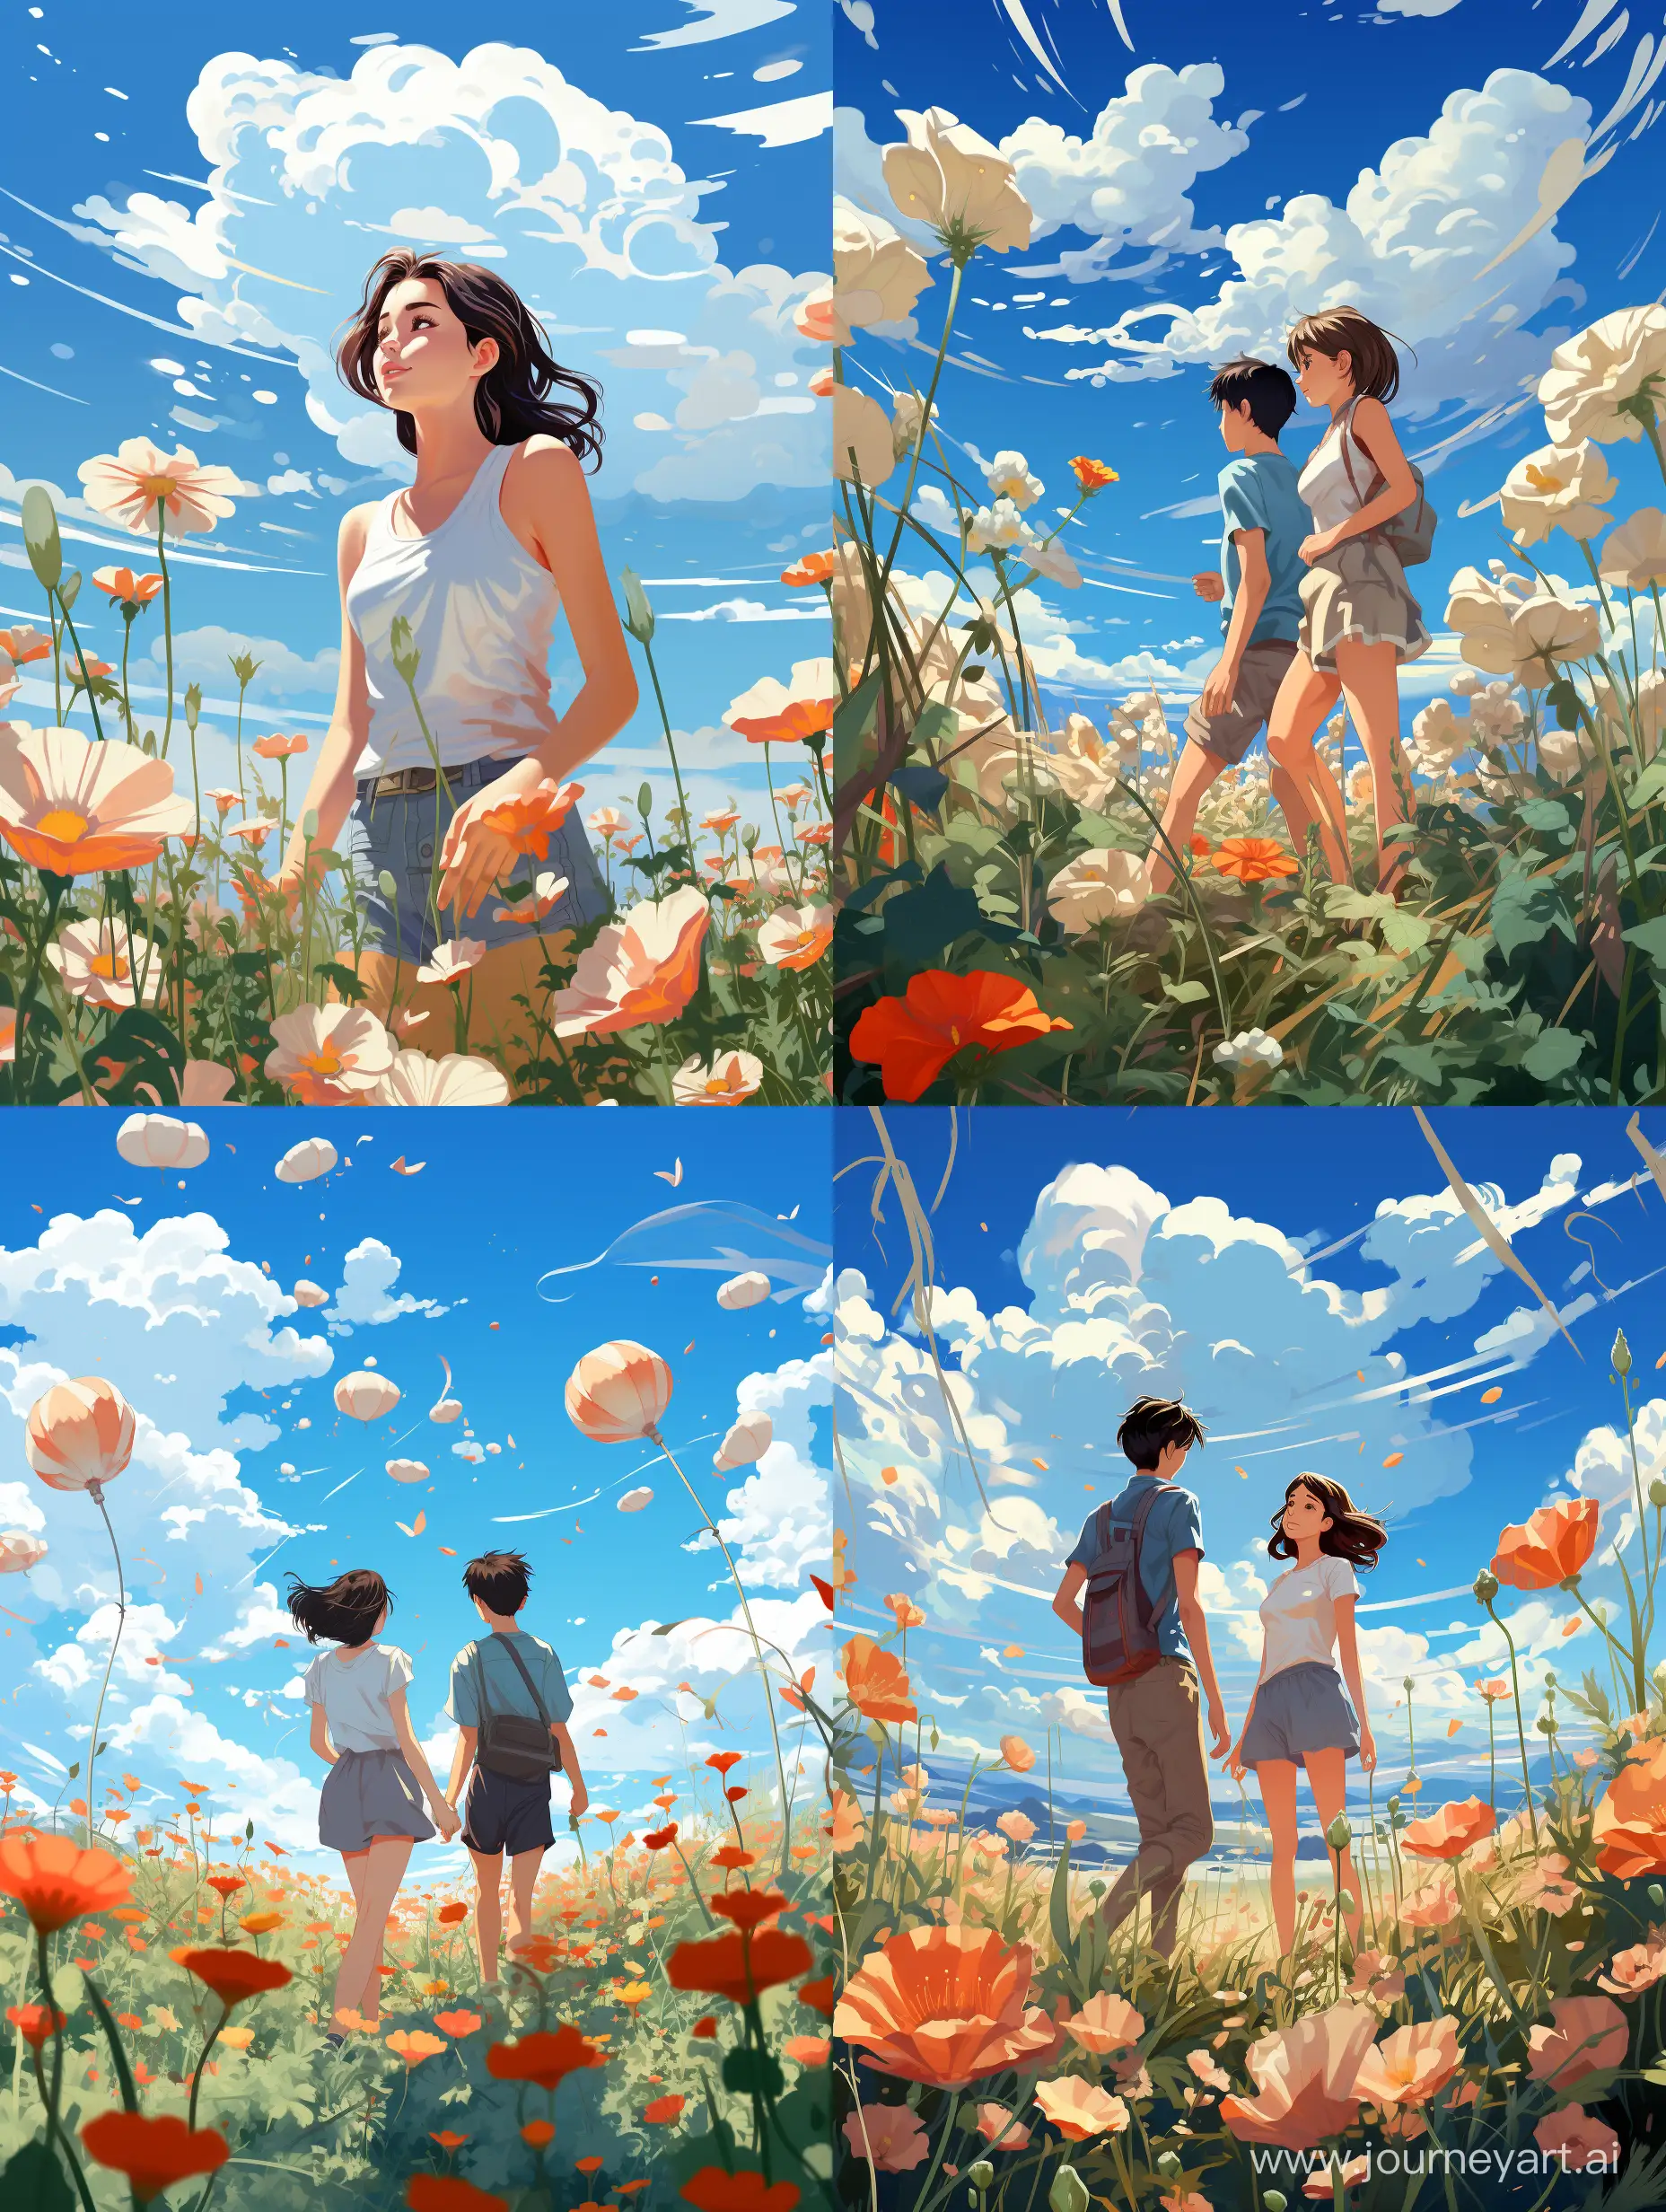 Vibrant-Teenagers-Playing-in-a-Sea-of-Flowers-under-the-Summer-Sky